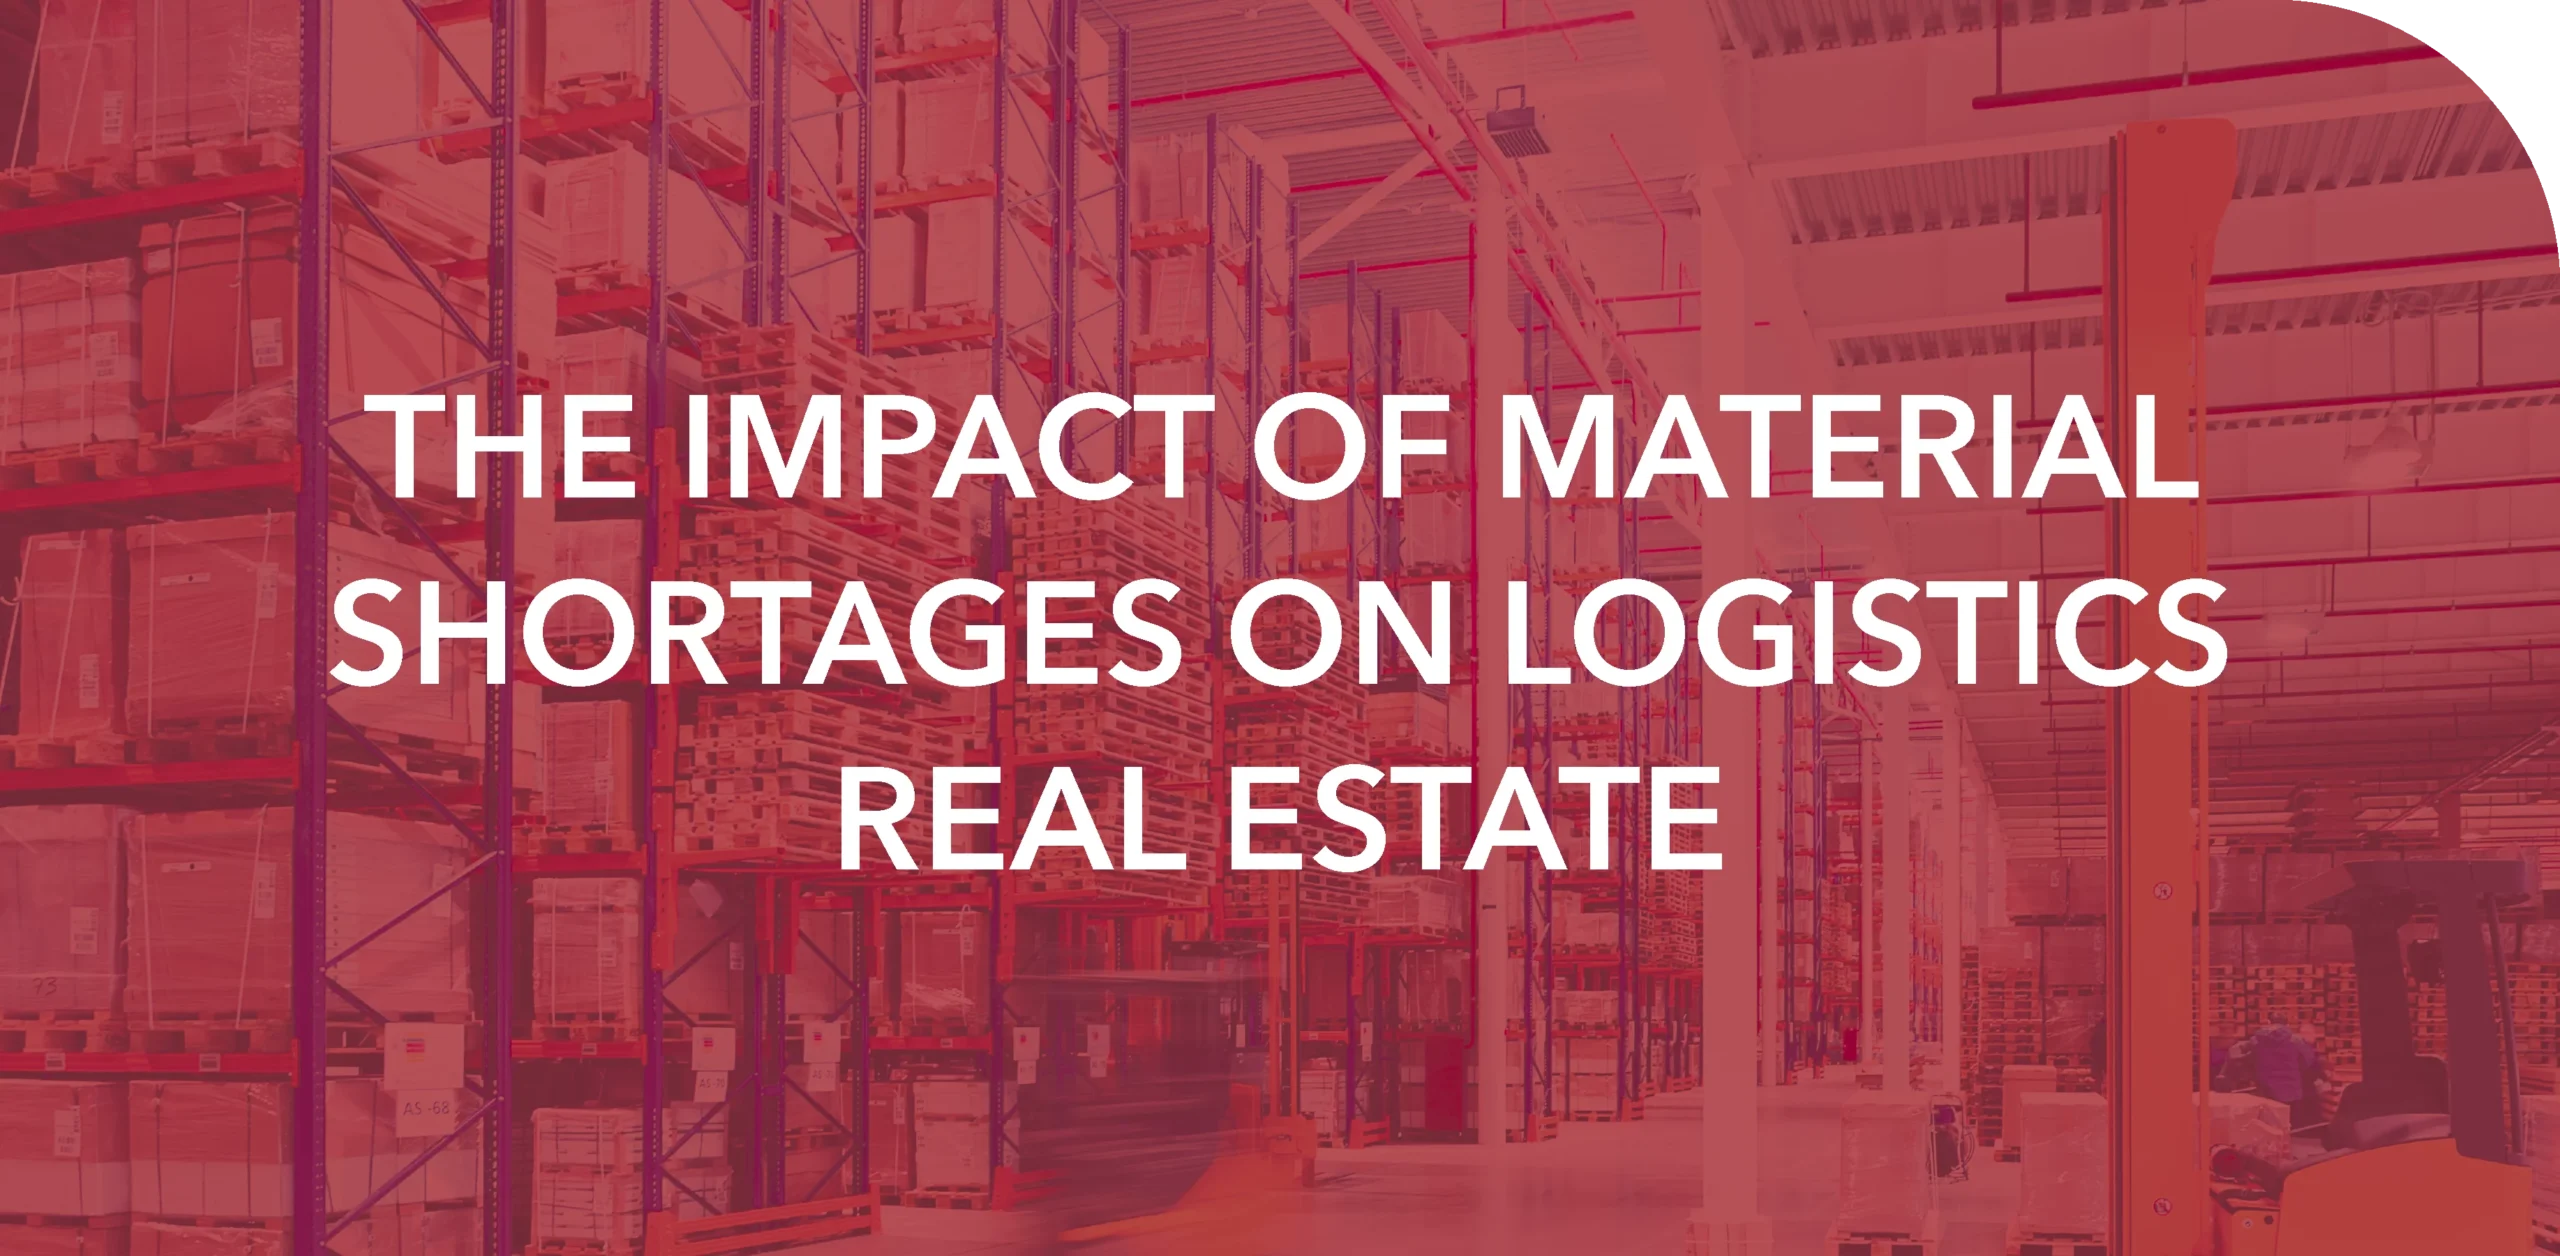 THE IMPACT OF MATERIAL SHORTAGES ON LOGISTICS REAL ESTATE